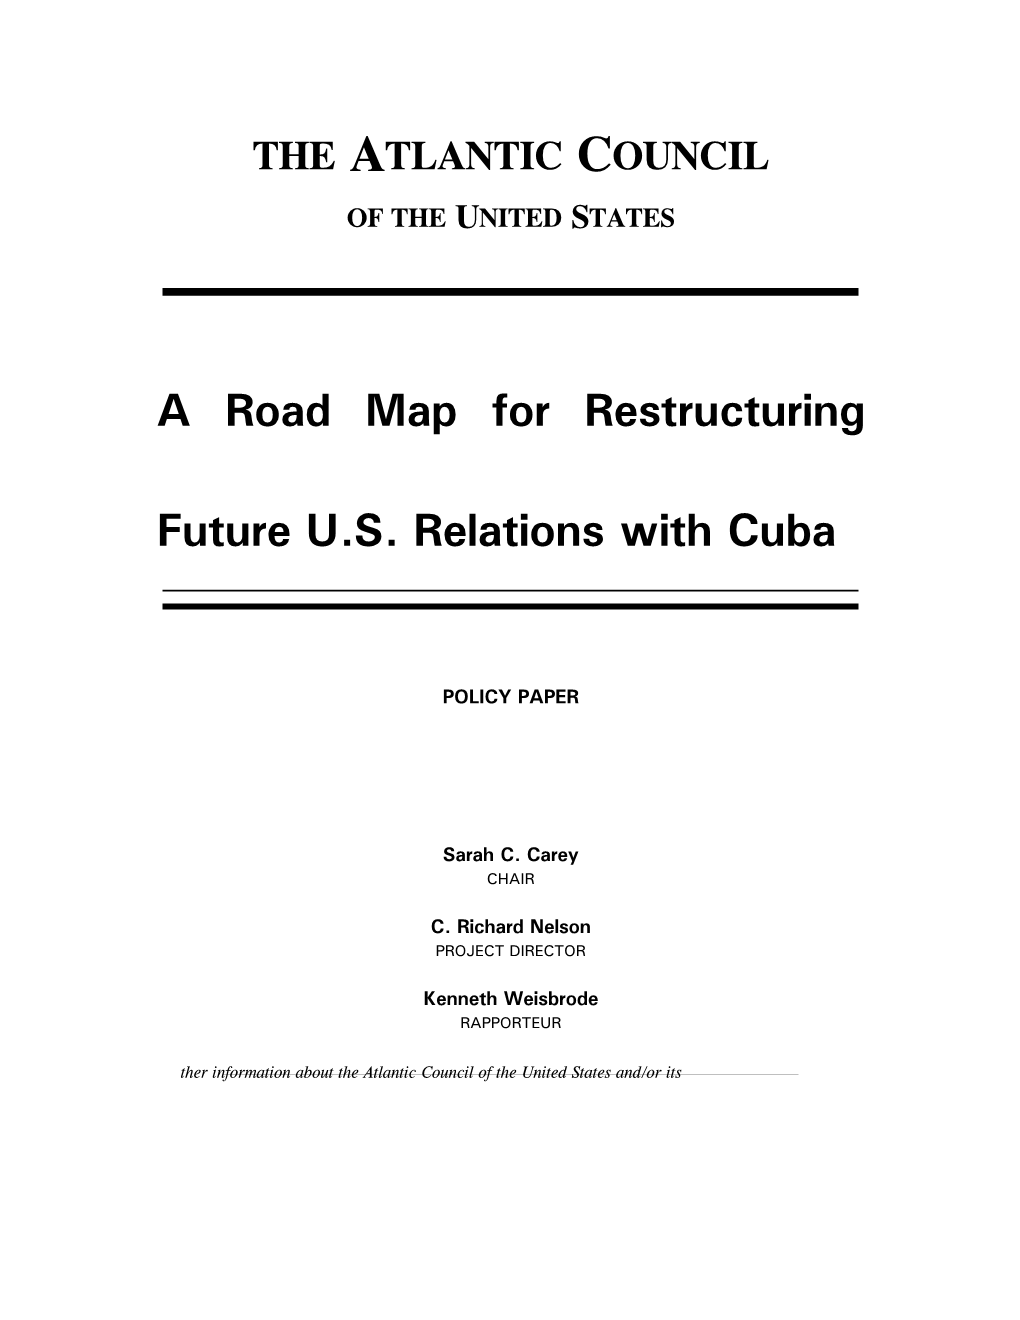 A Road Map for Restructuring Future US Relations with Cuba